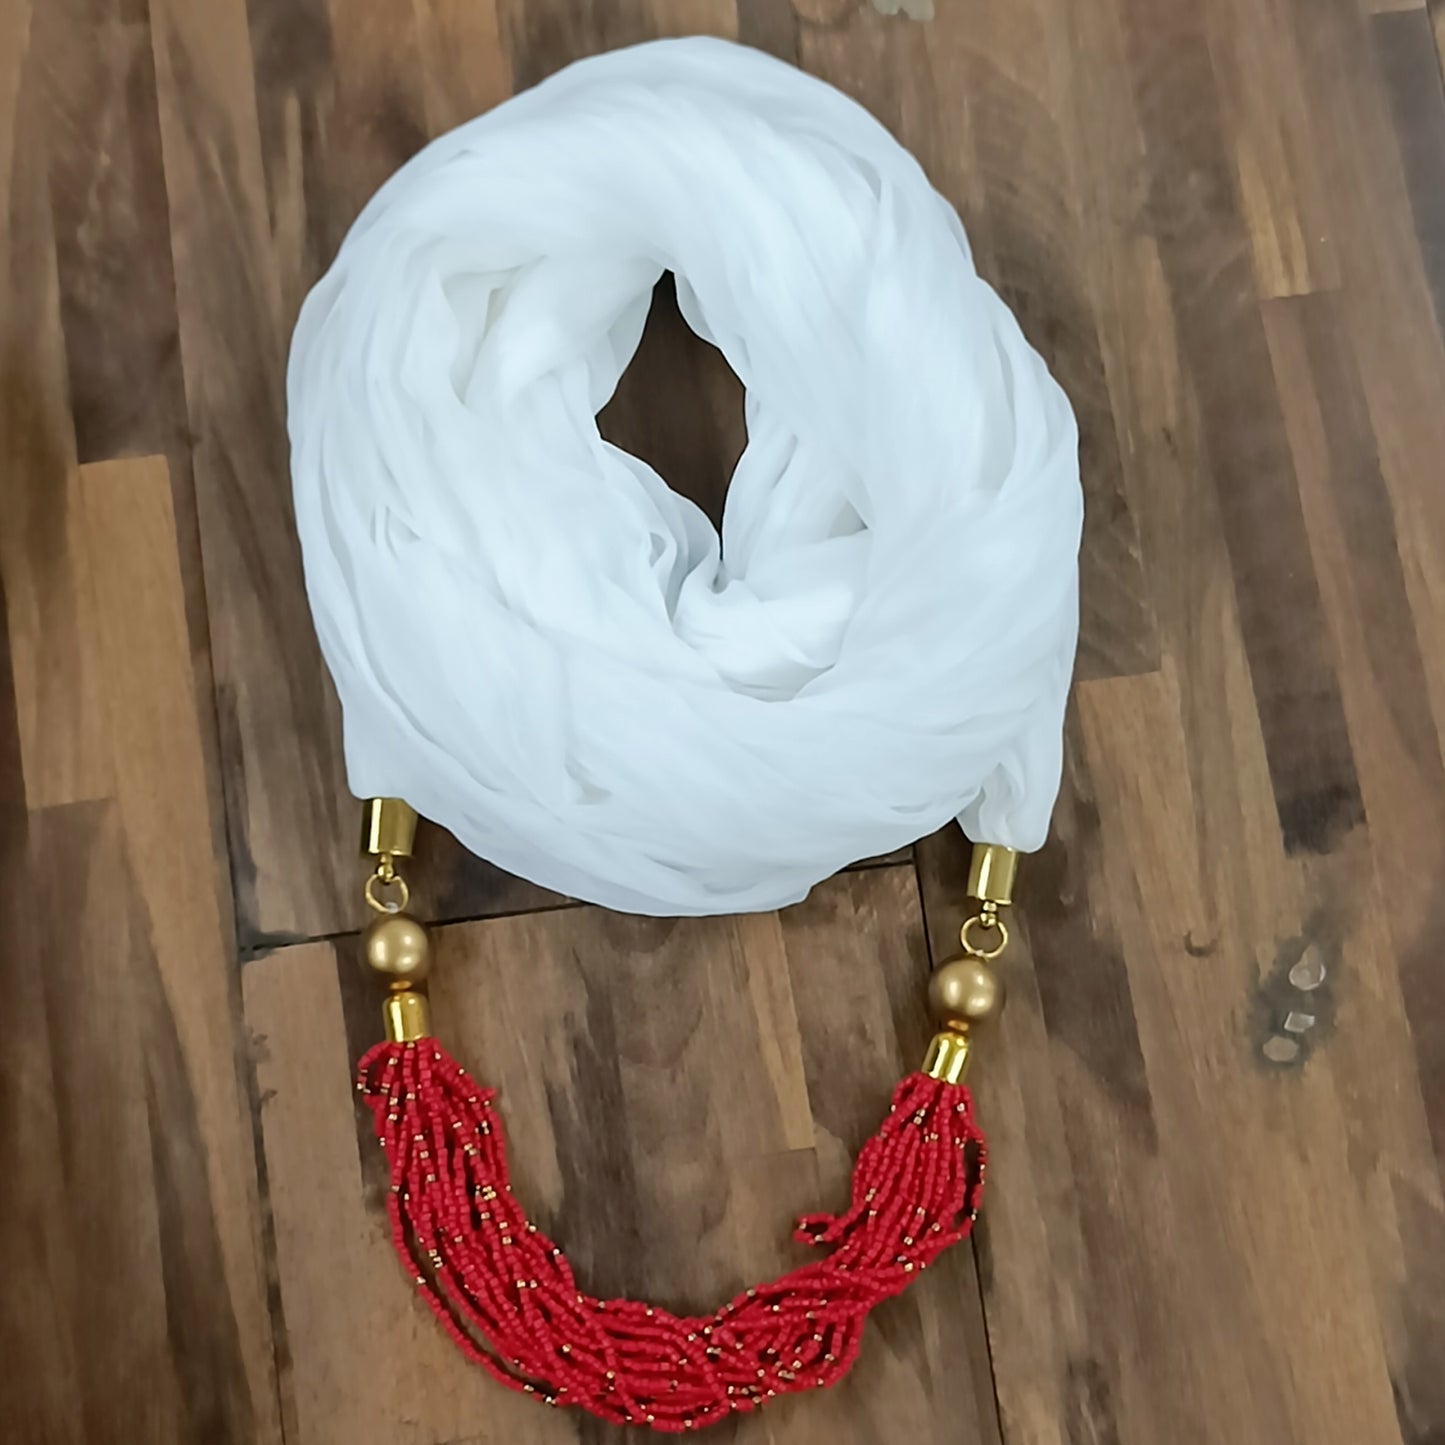 Bdiva Handmade White Scarf With Red Colored Seed Beads Necklace.